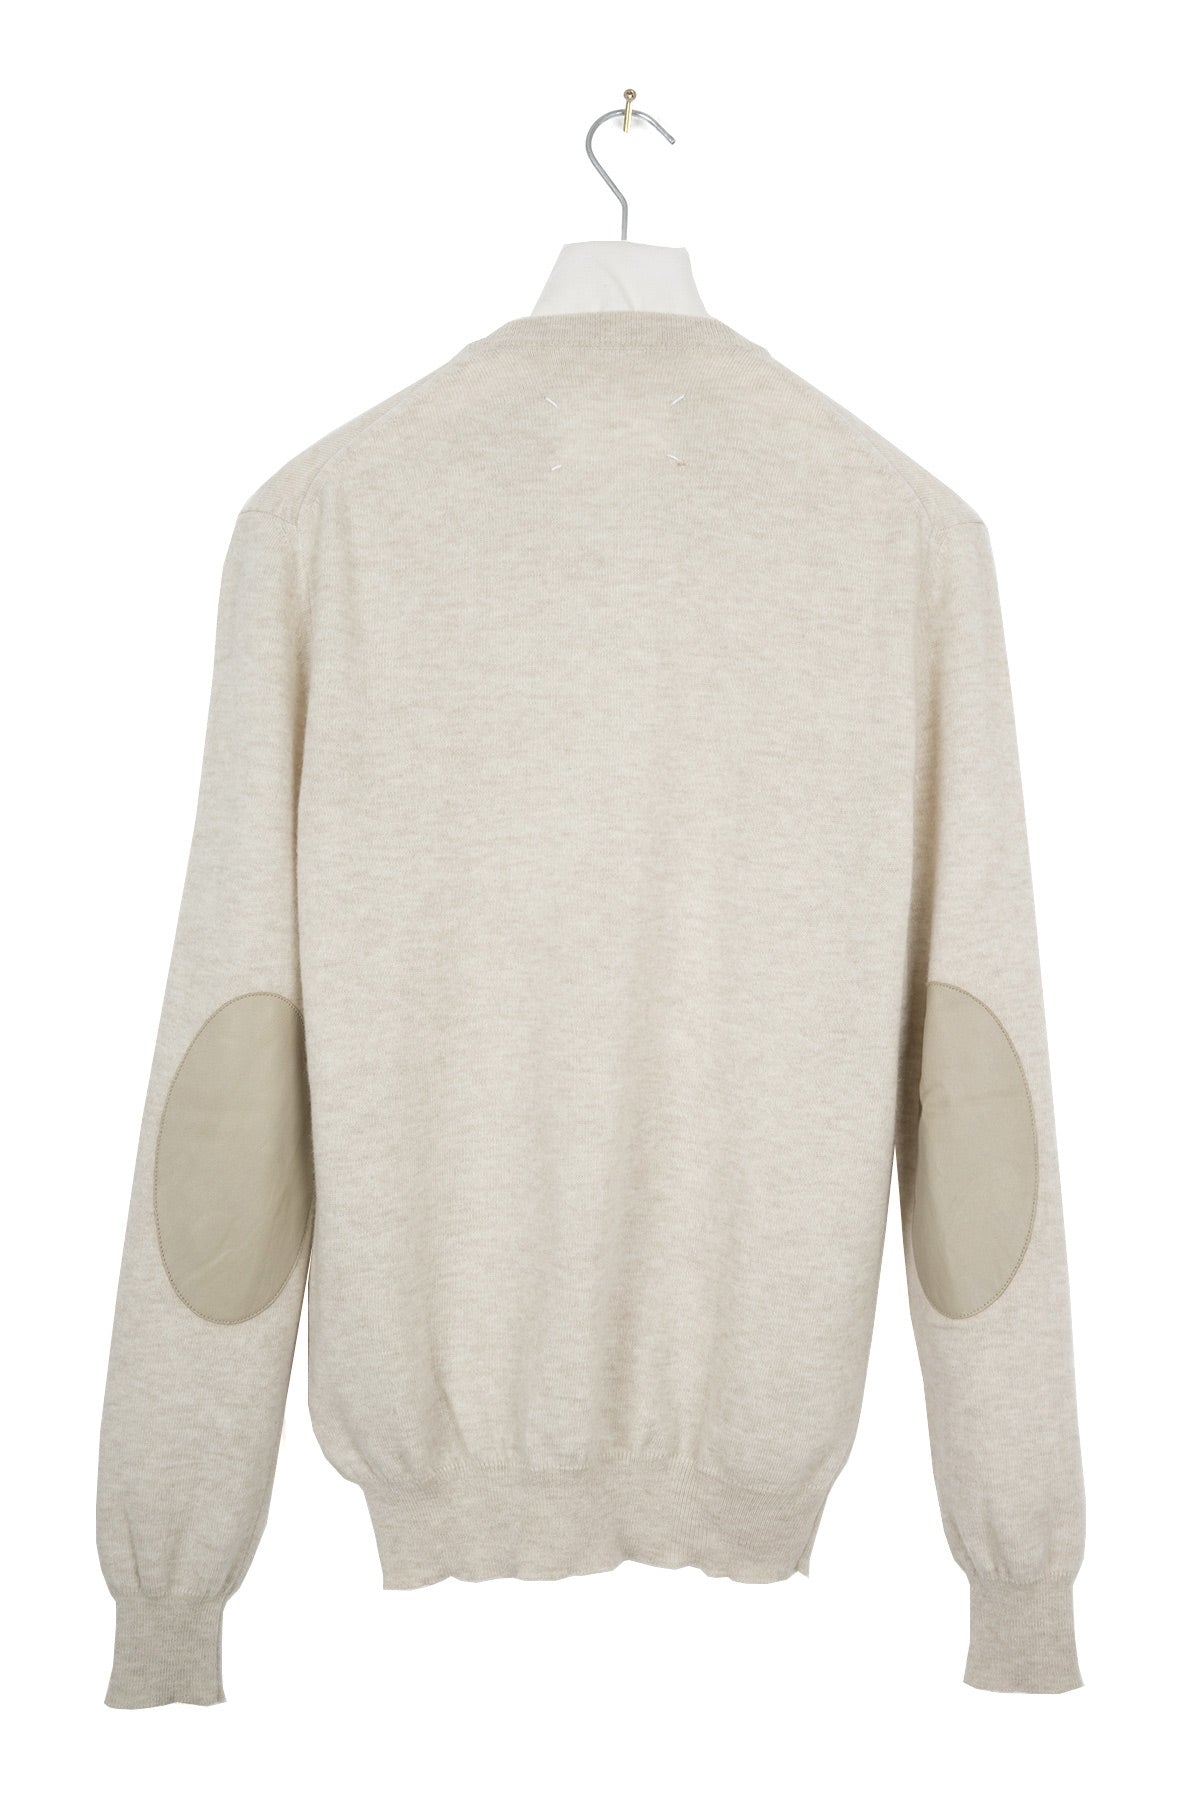 2008 A/W V-NECK WOOL SWEATER WITH LEATHER ELBOW PATCHES